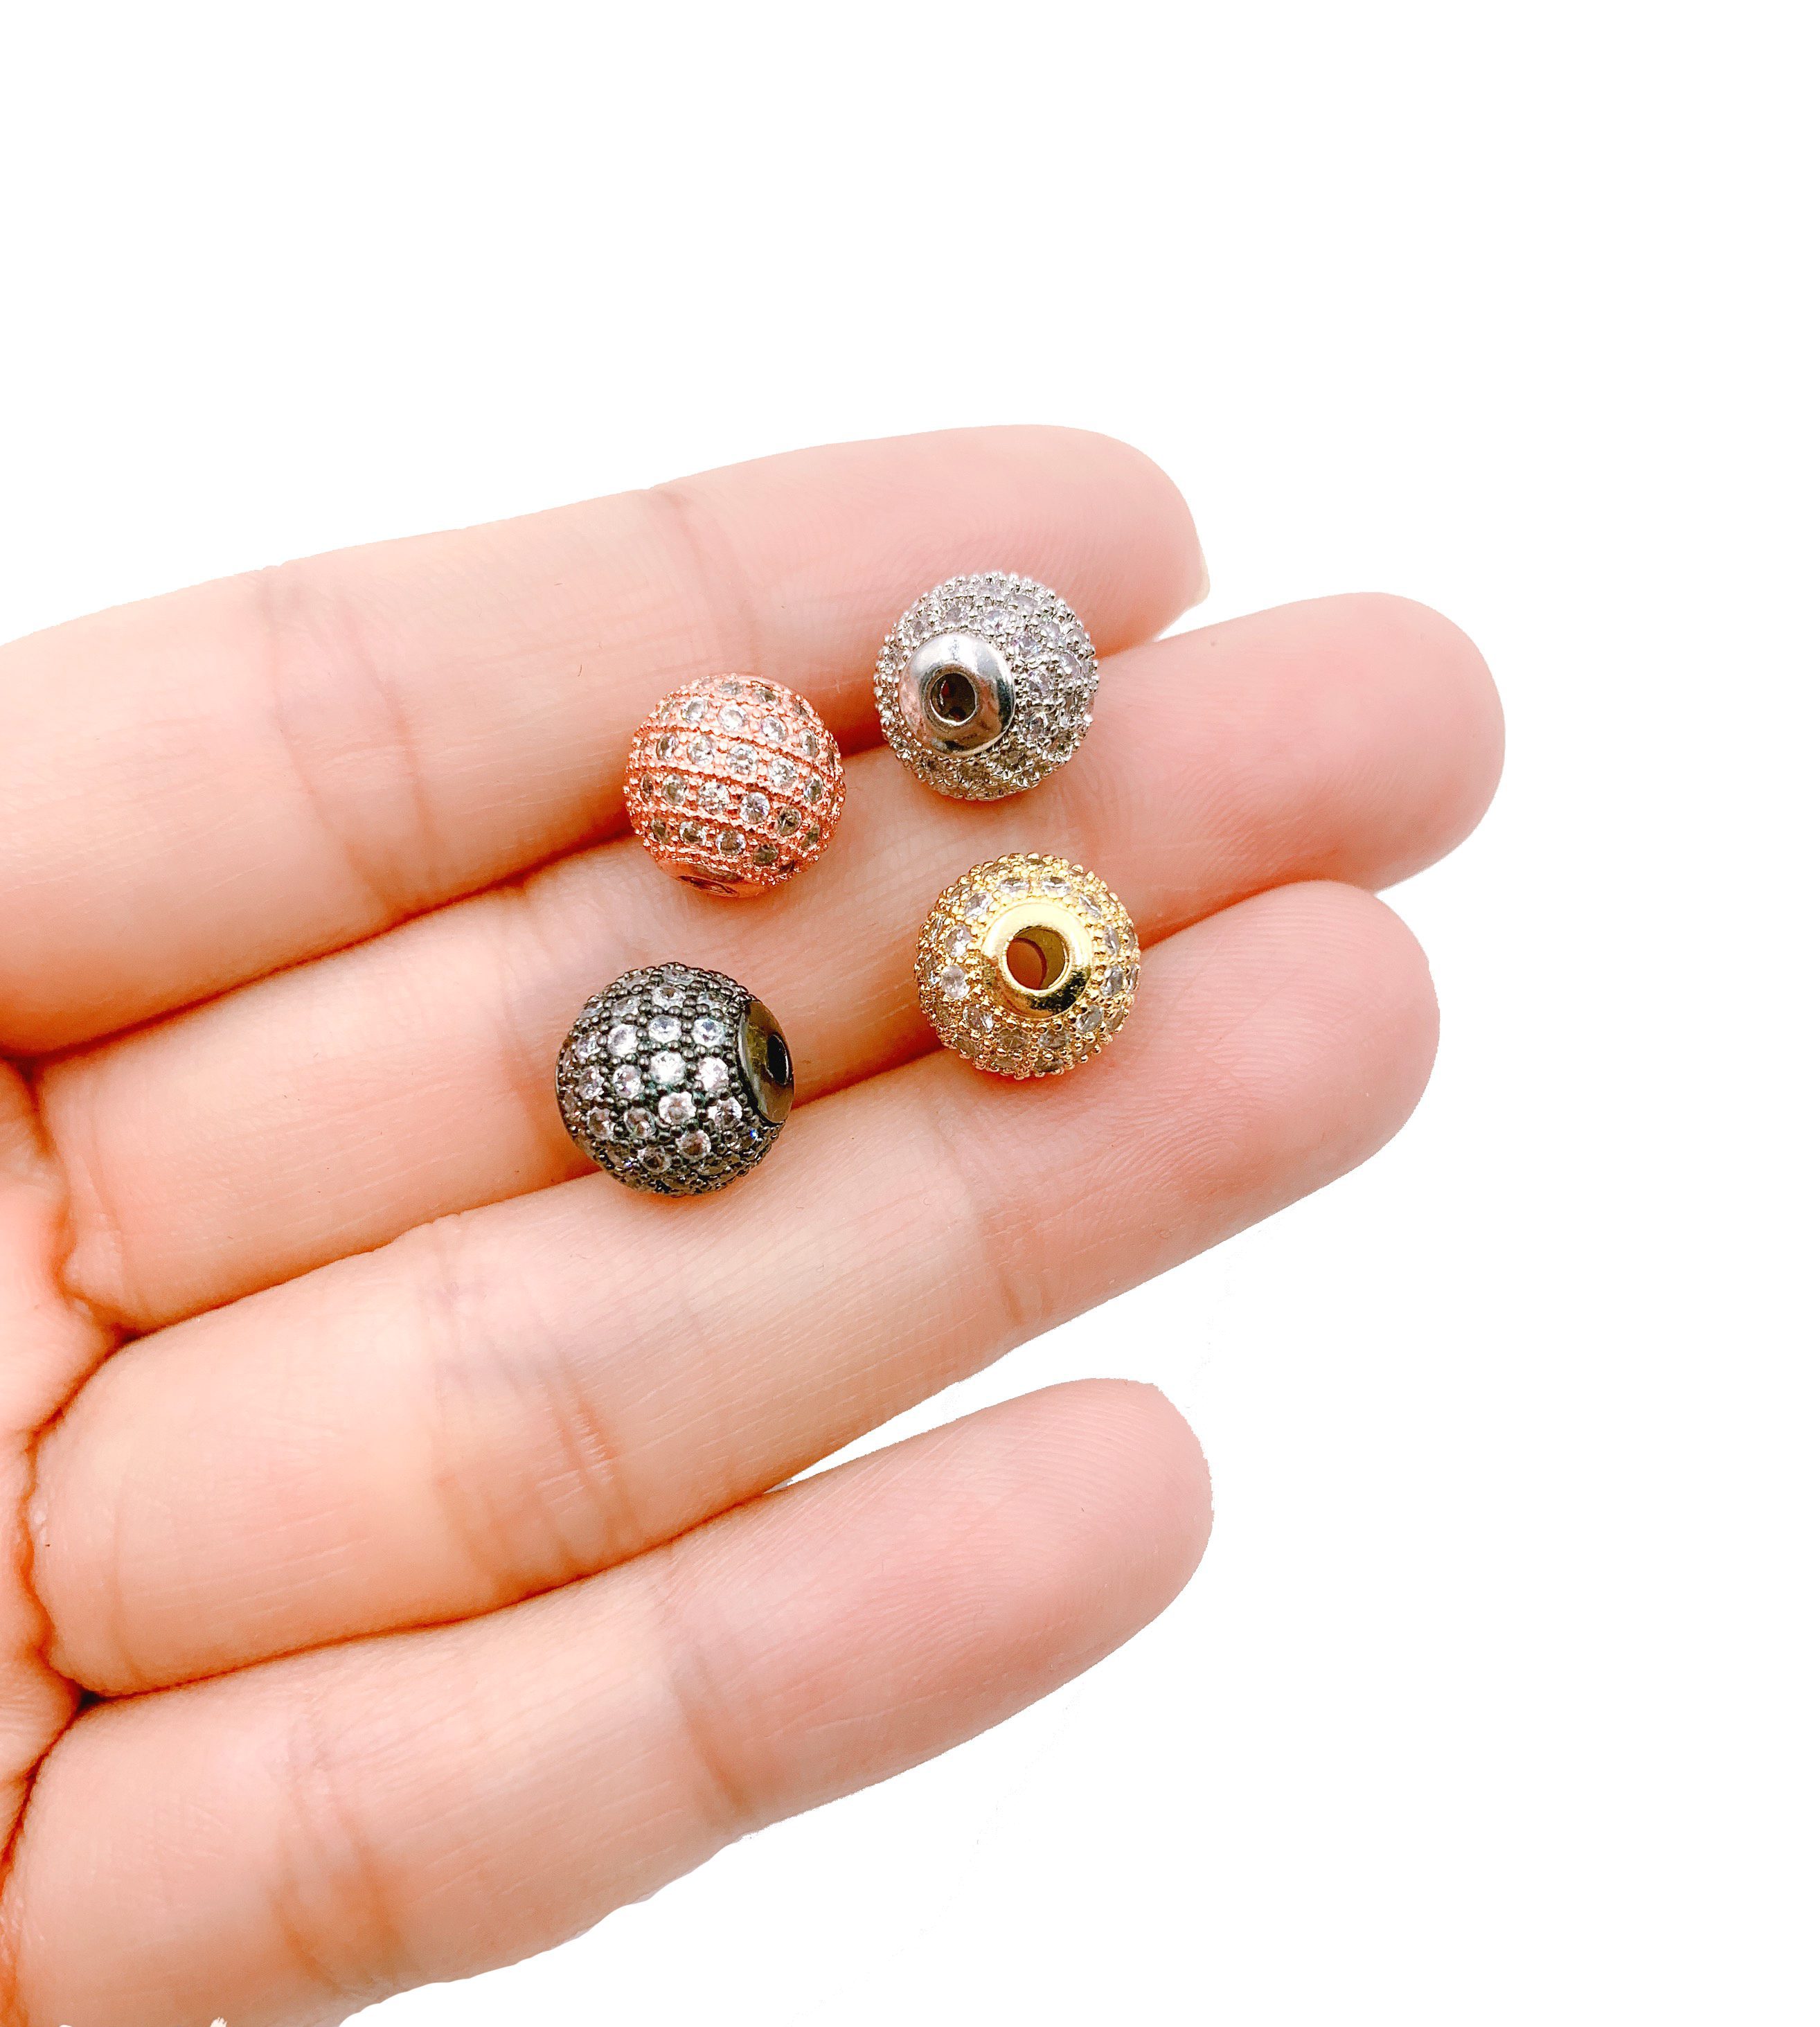 5pc 12 mm Plaqué Or Cz Micro Pave Ball Loose Beads for jewelry making 